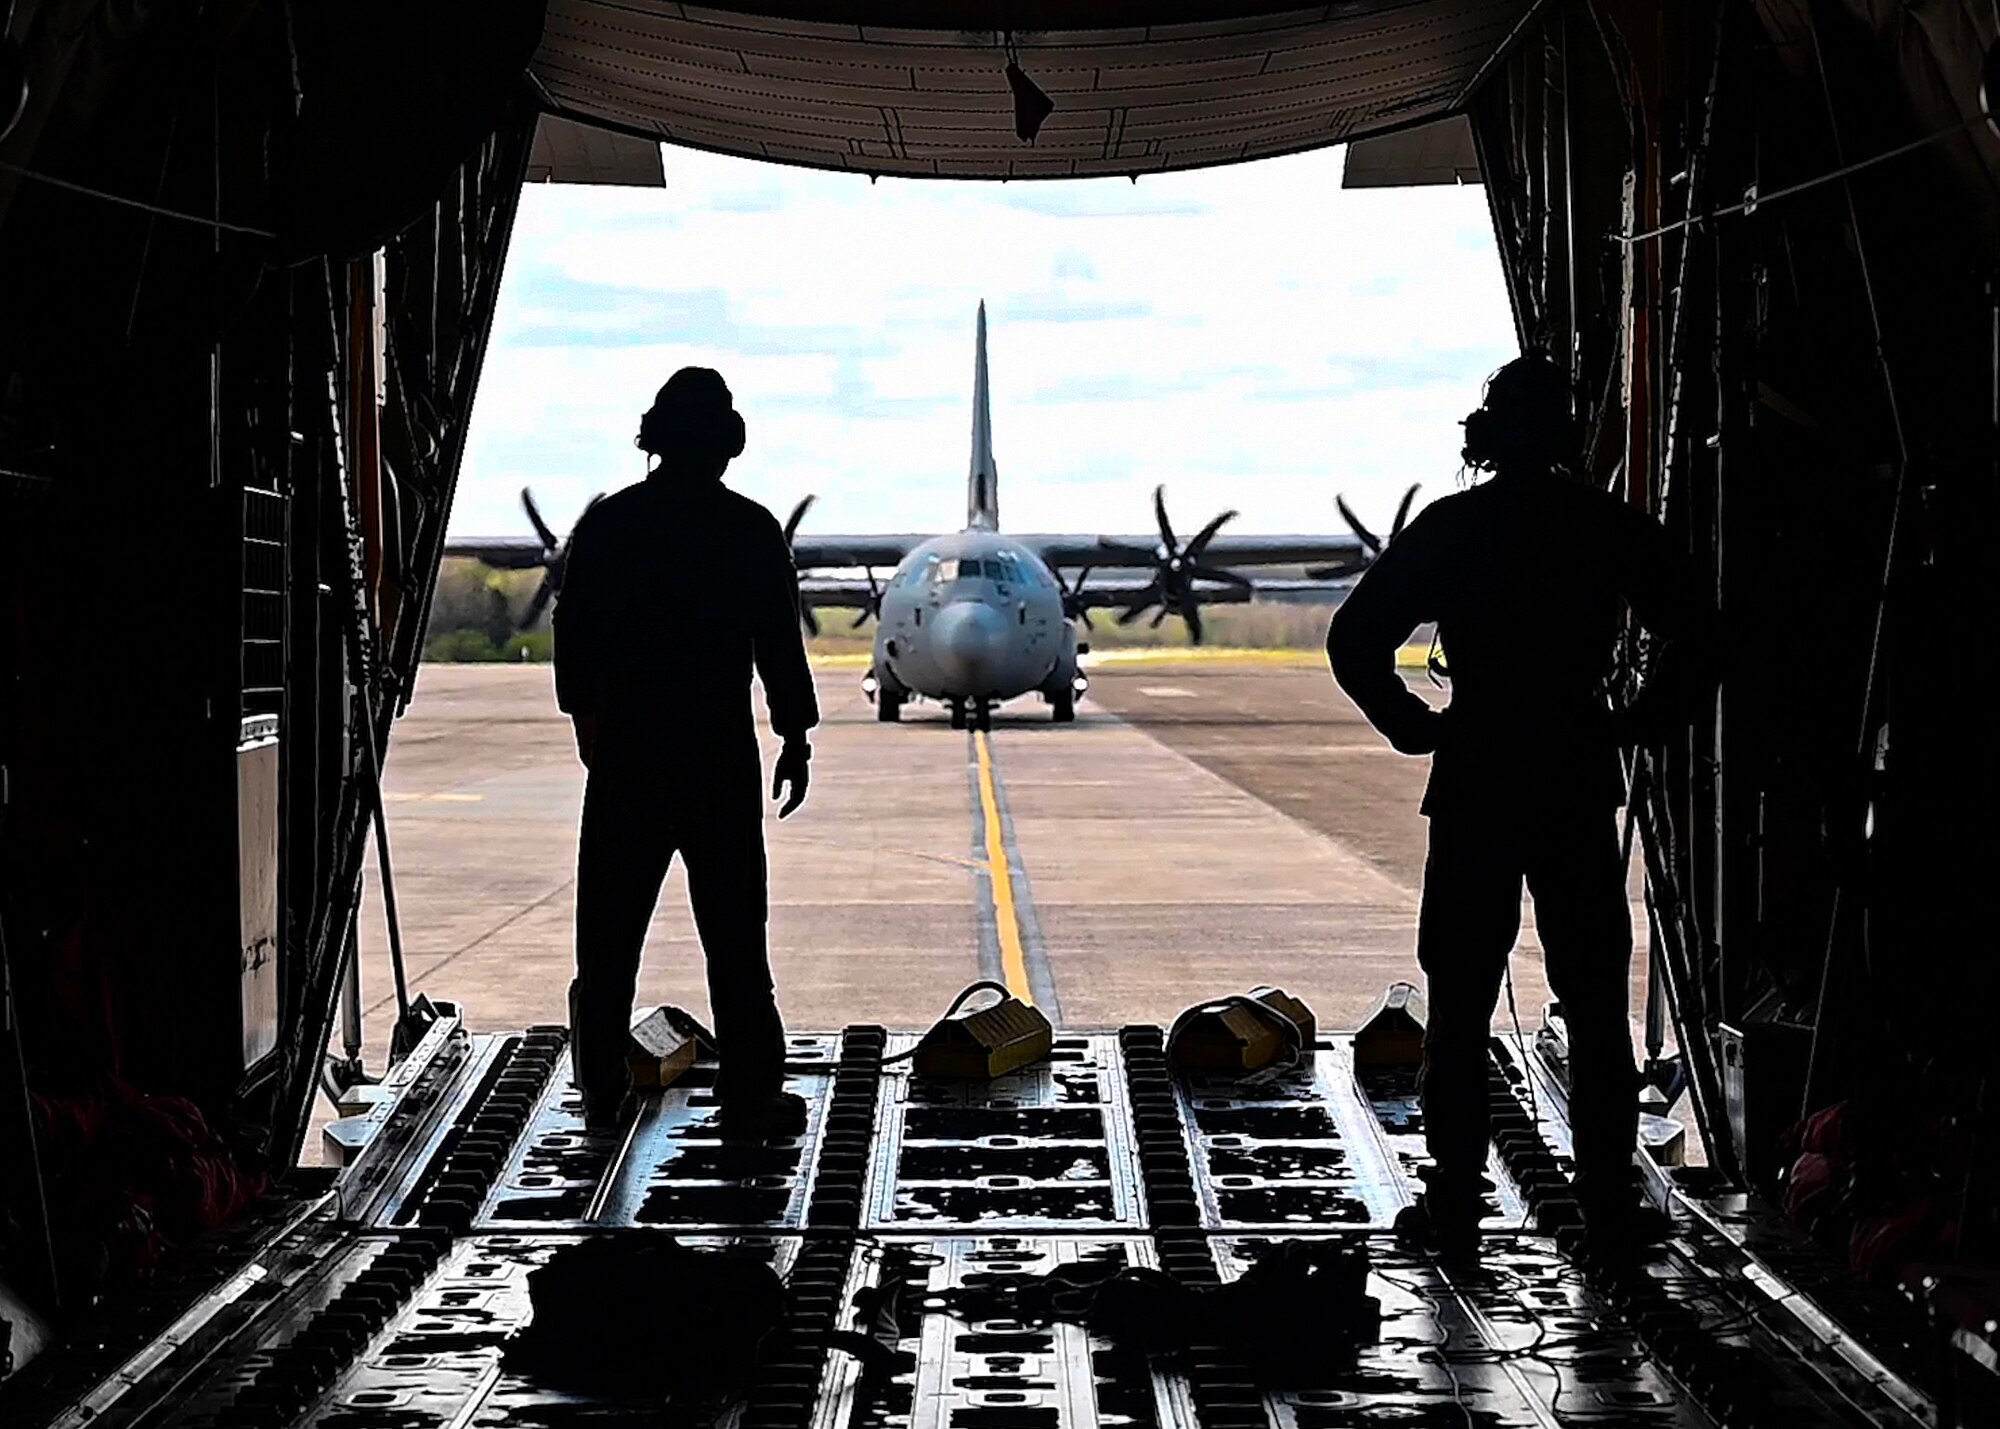 Loadmasters from the 29th Weapons Squadron stand on the ramp of a C-130J Super Hercules